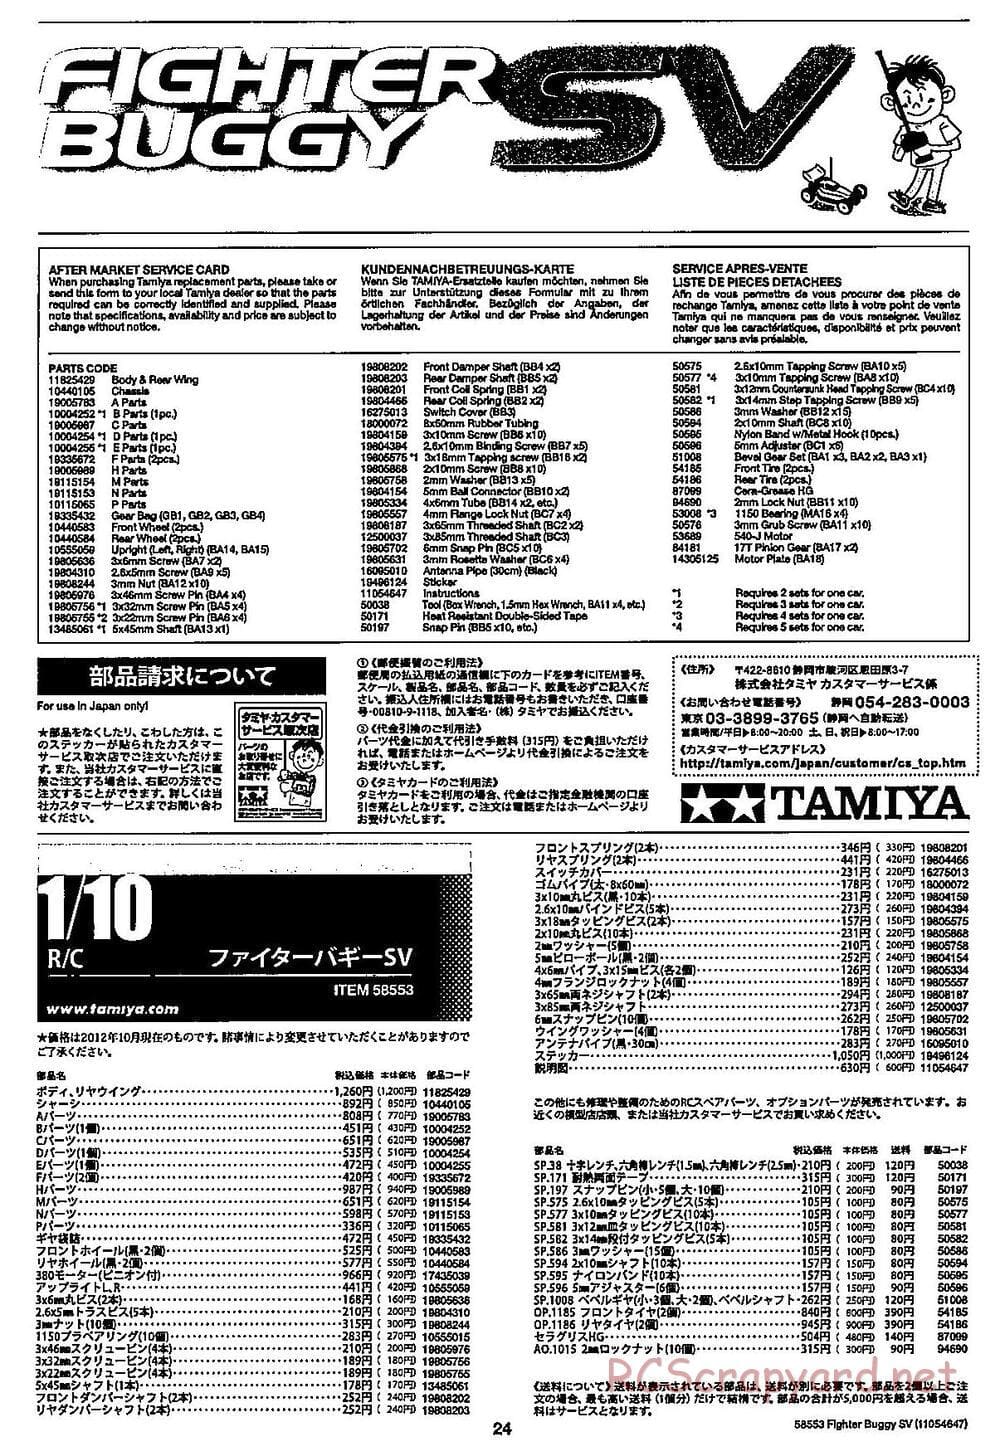 Tamiya - Fighter Buggy SV Chassis - Manual - Page 24